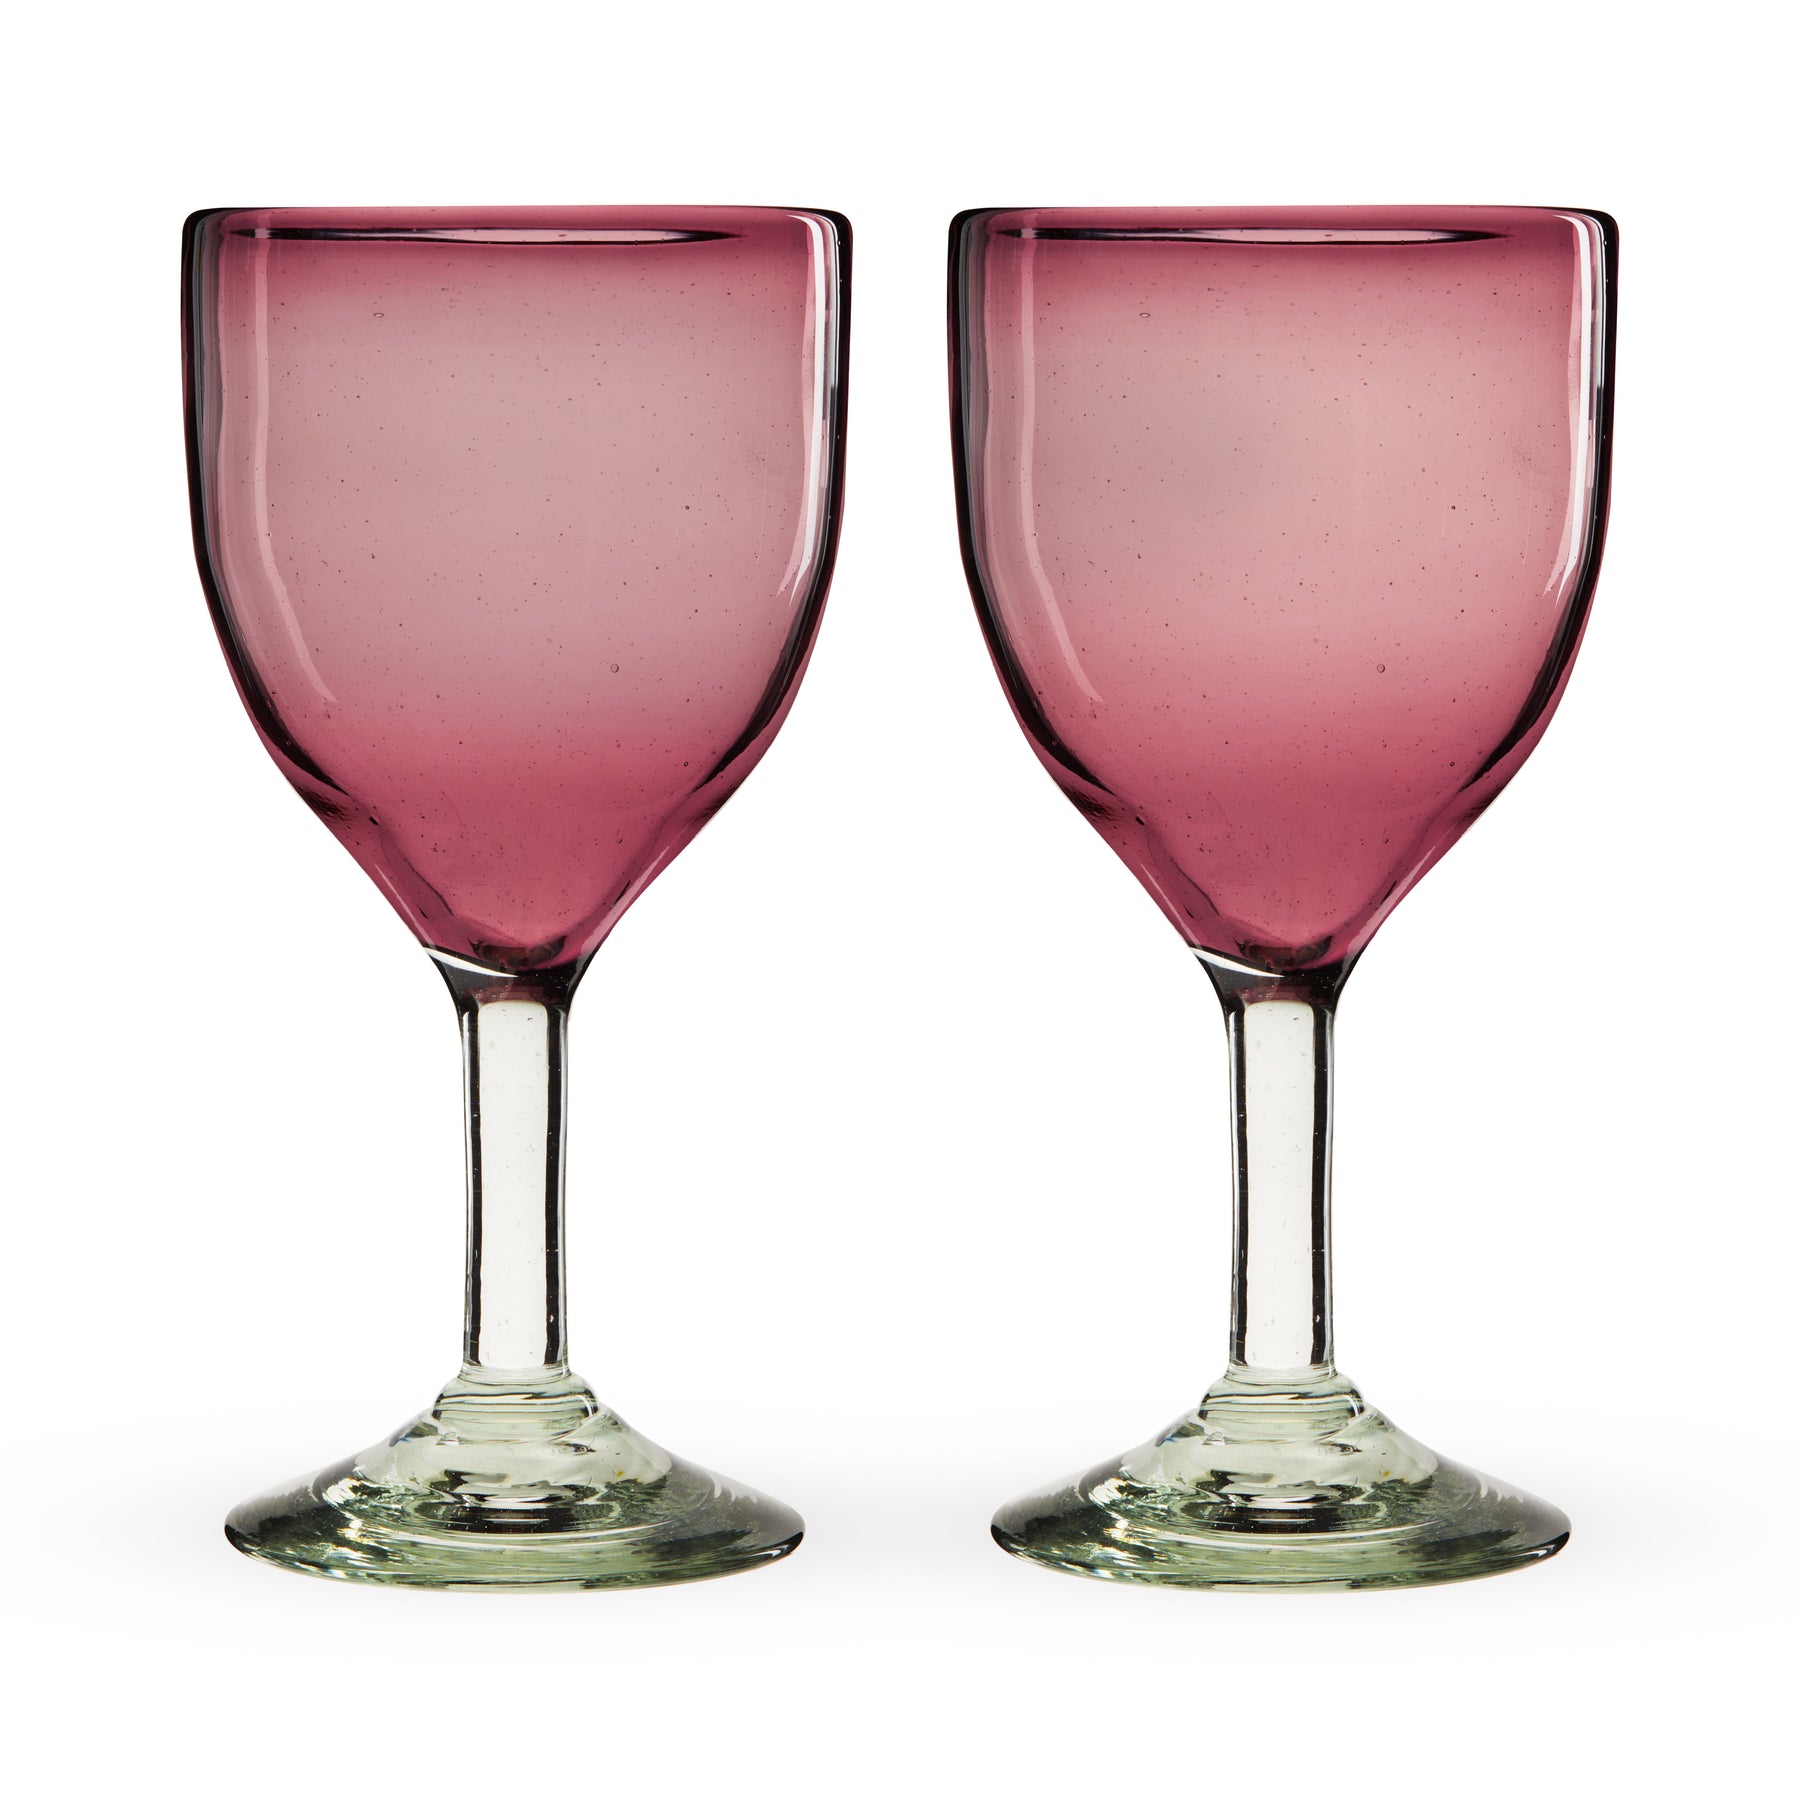 Pink Ribbon Red Wine Glasses - Set of 2 in gift box – Julianna Glass